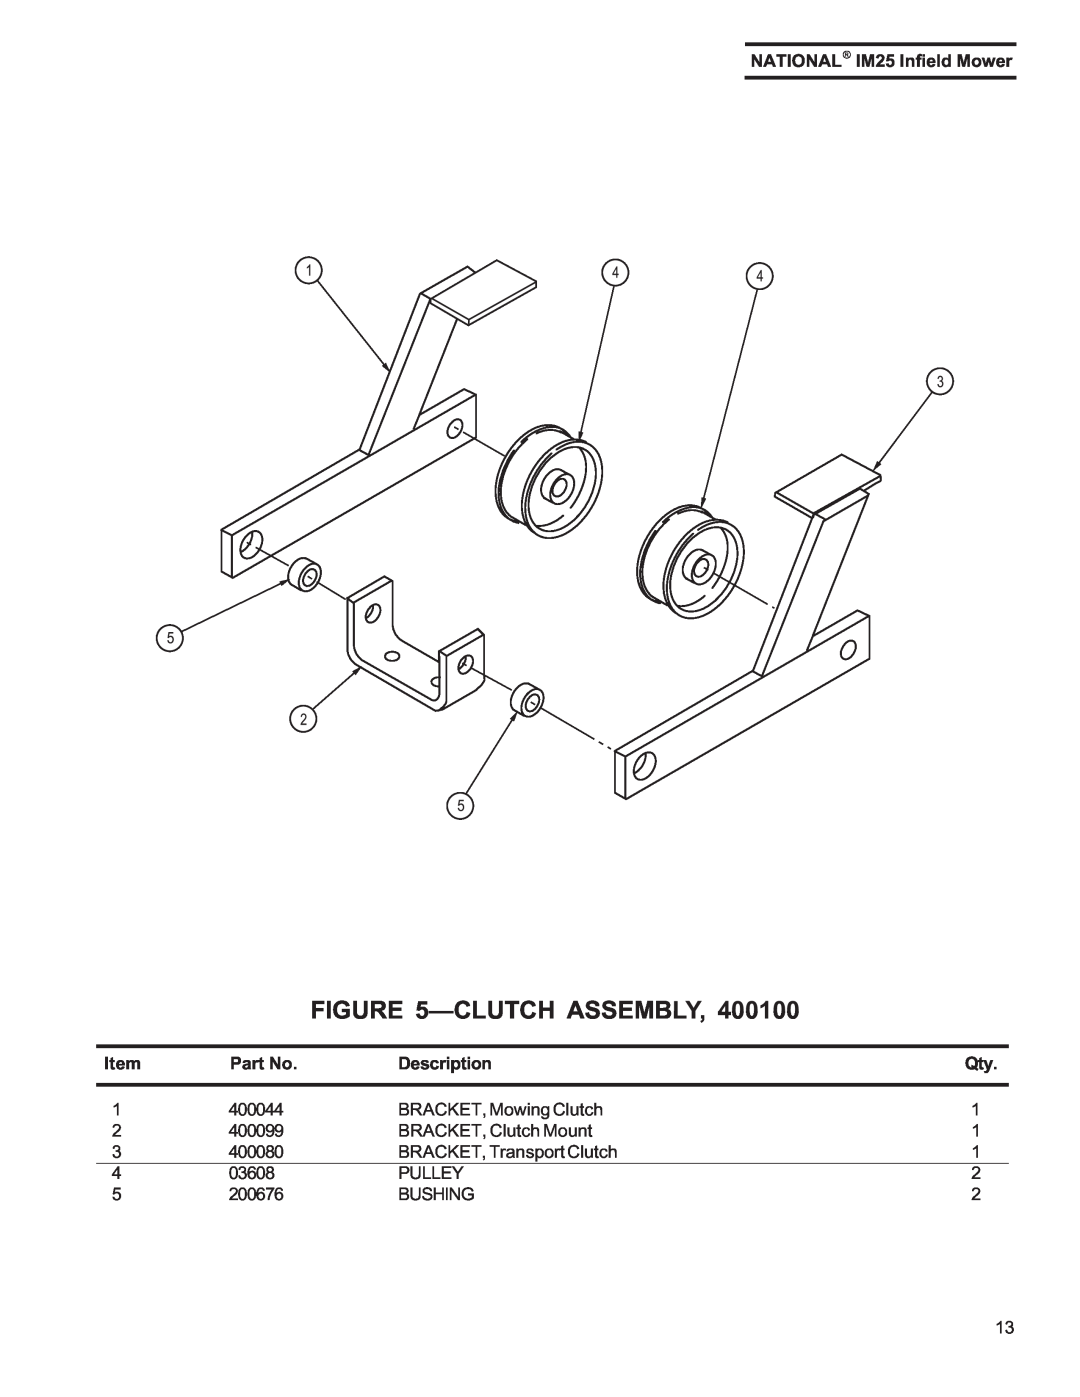 National Mower IM25 manual Clutch Assembly 